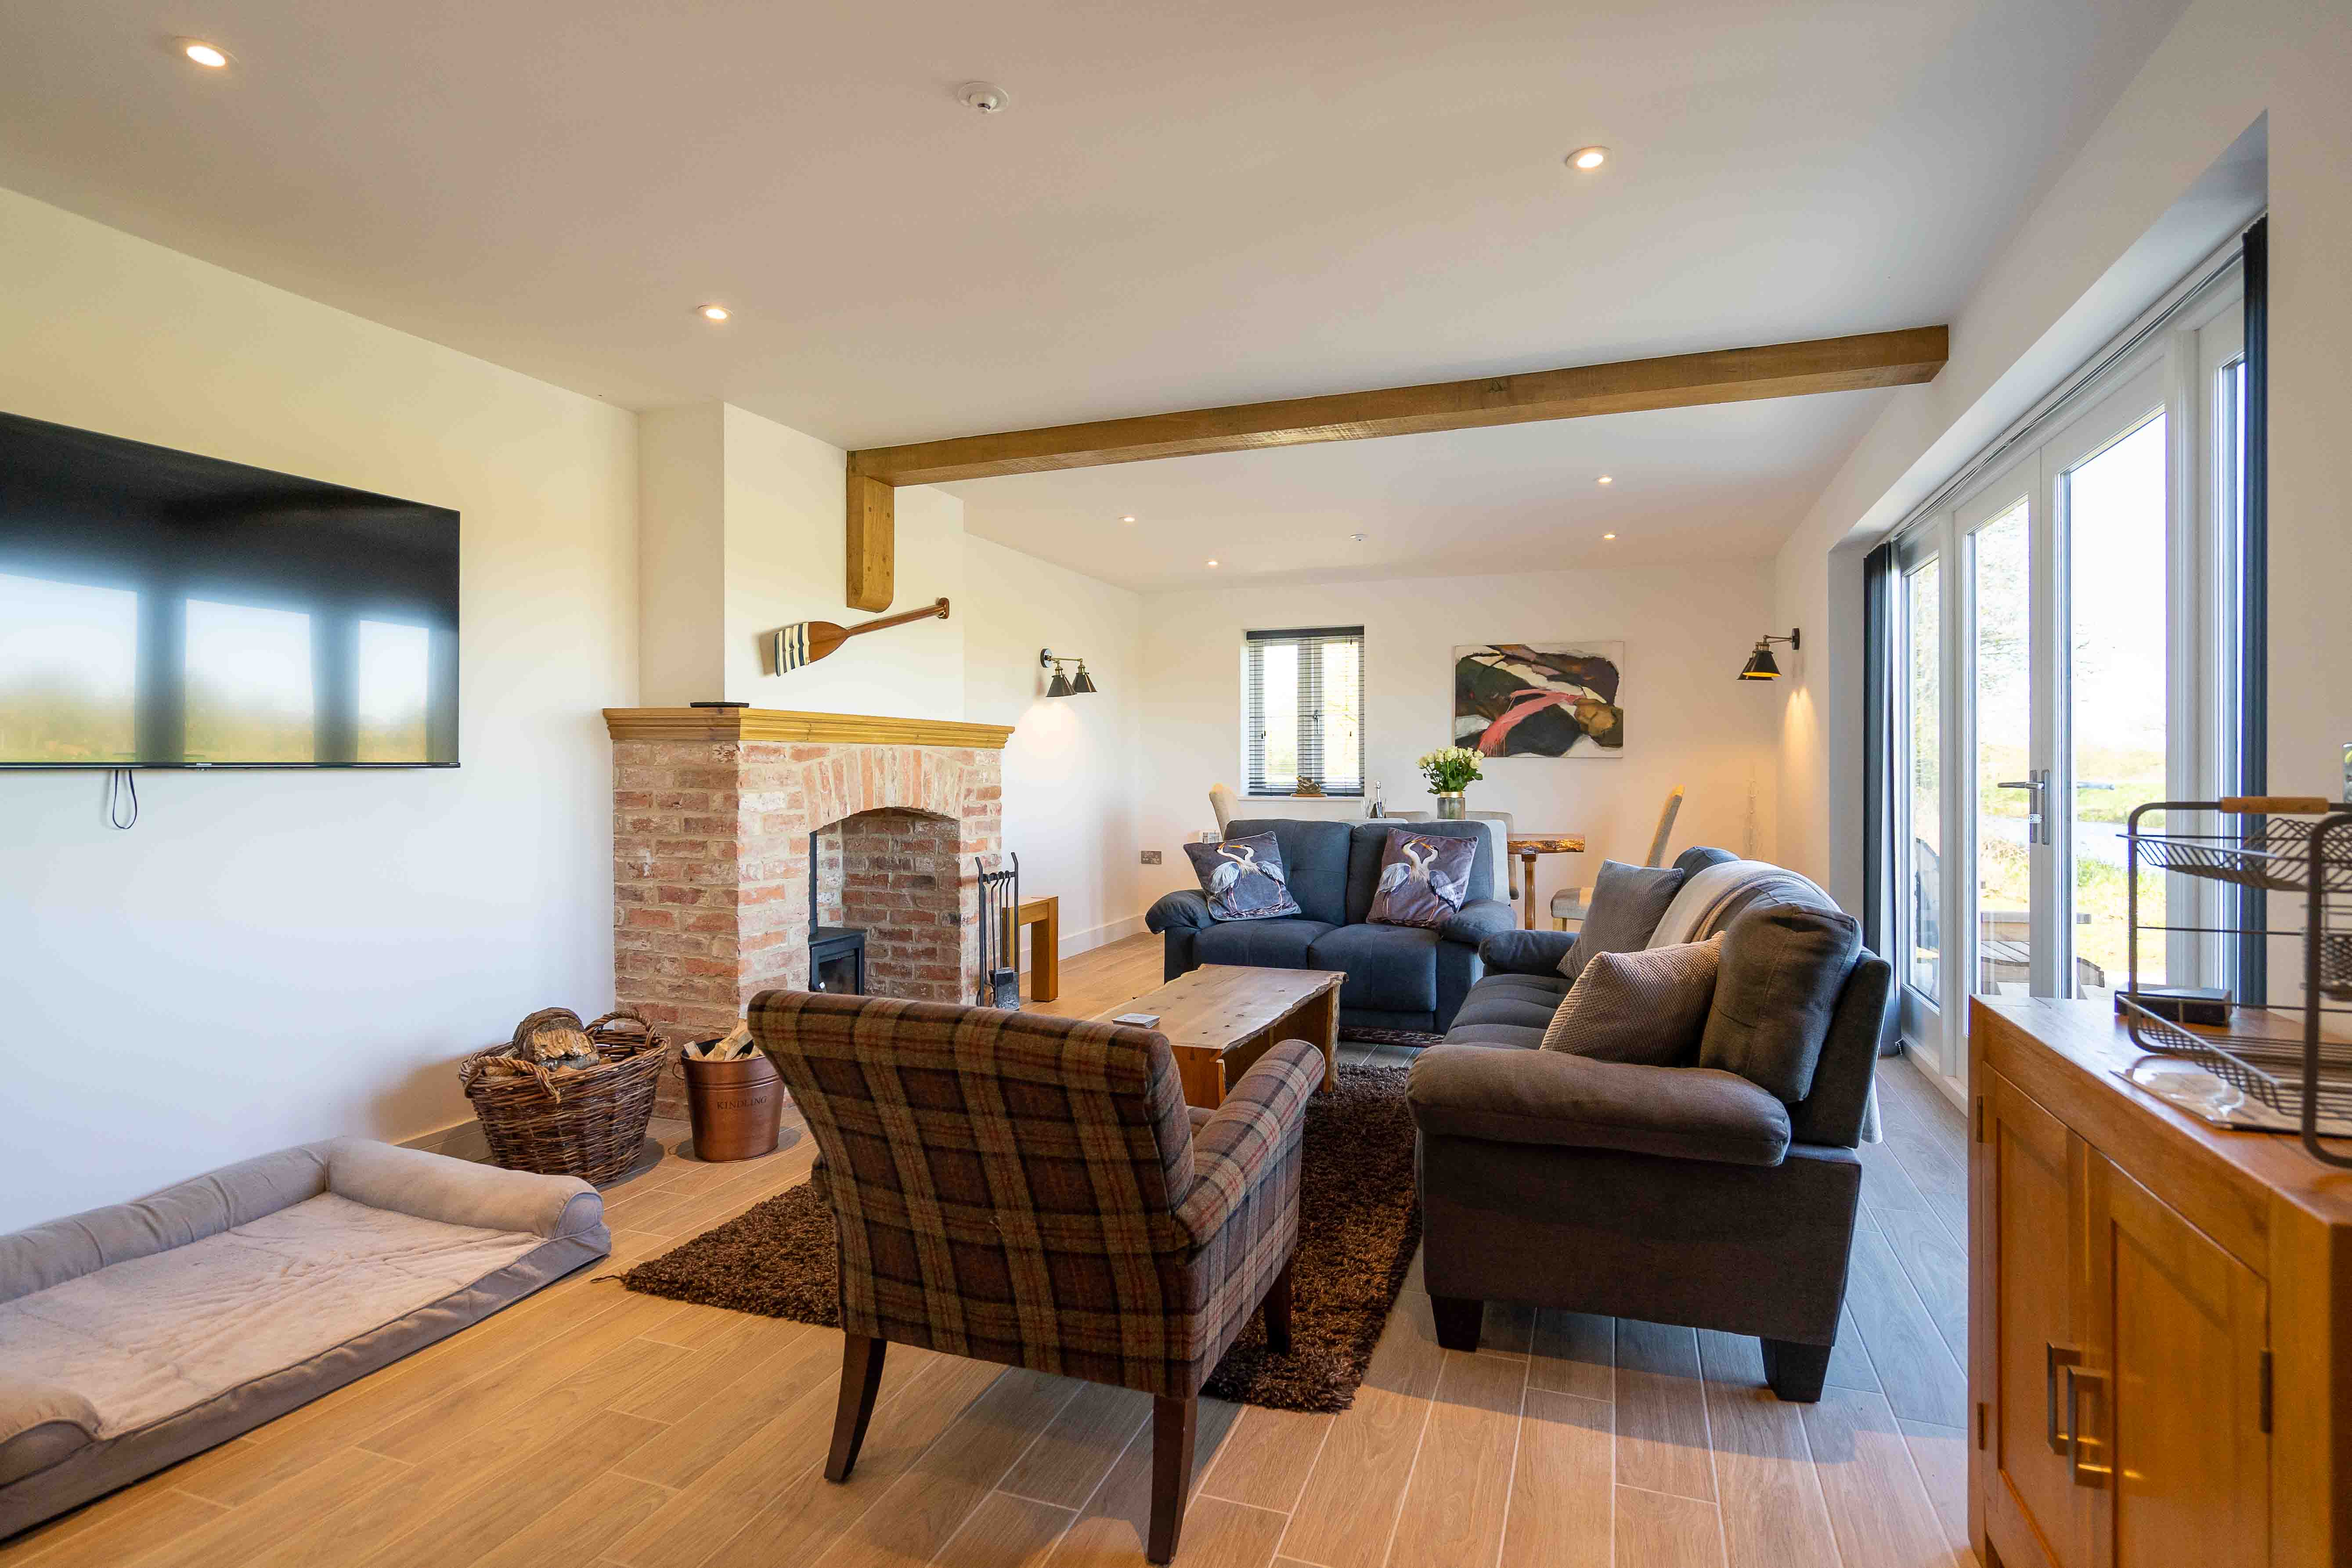 Fletland Holiday Hamlet, The Holt - lounge with wood stove and wall mounted TV